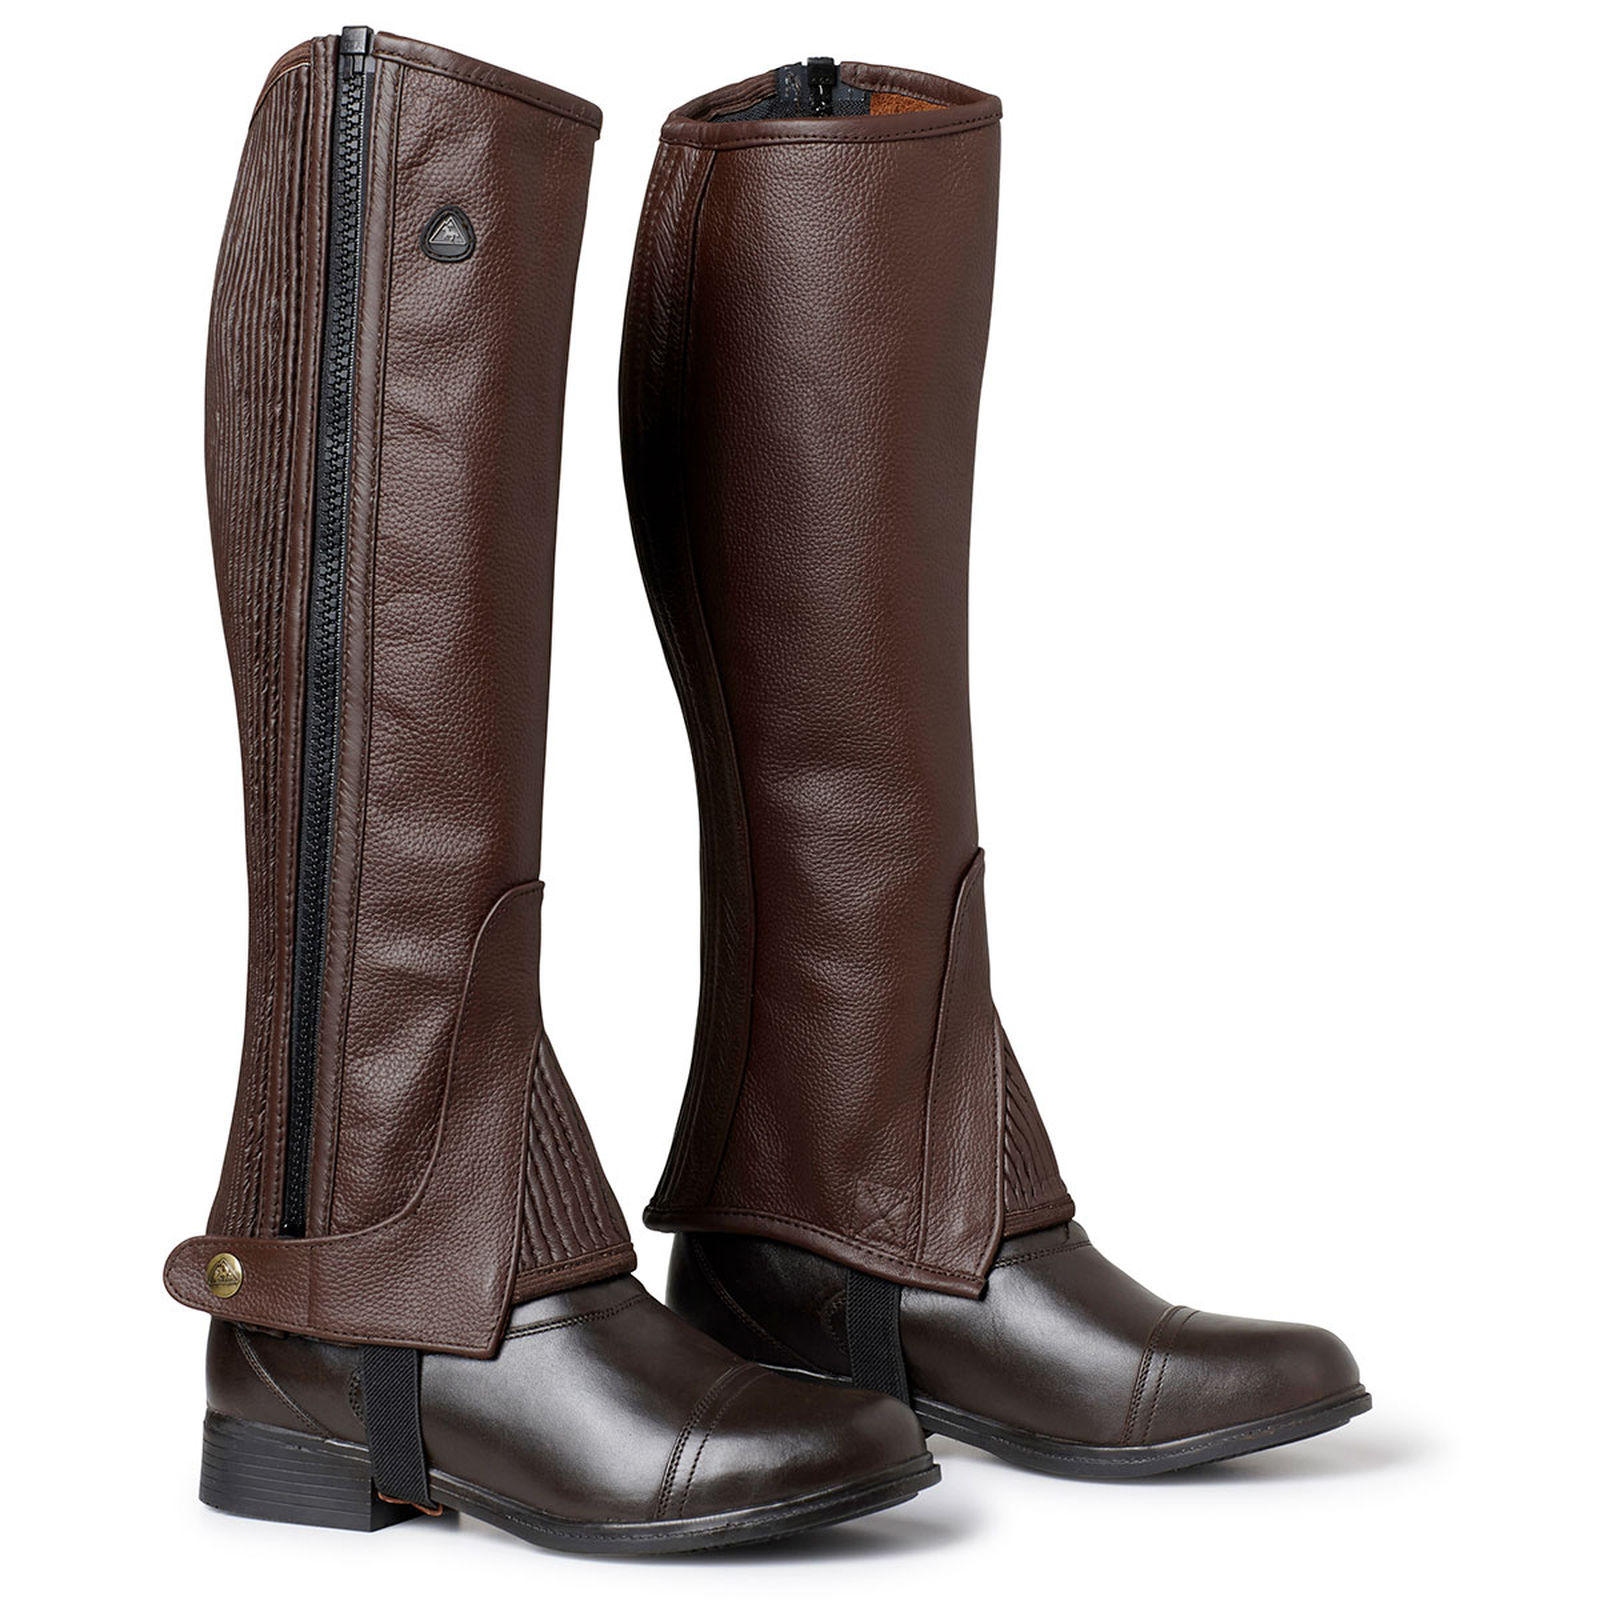 Ariat Ascent half chaps first look review